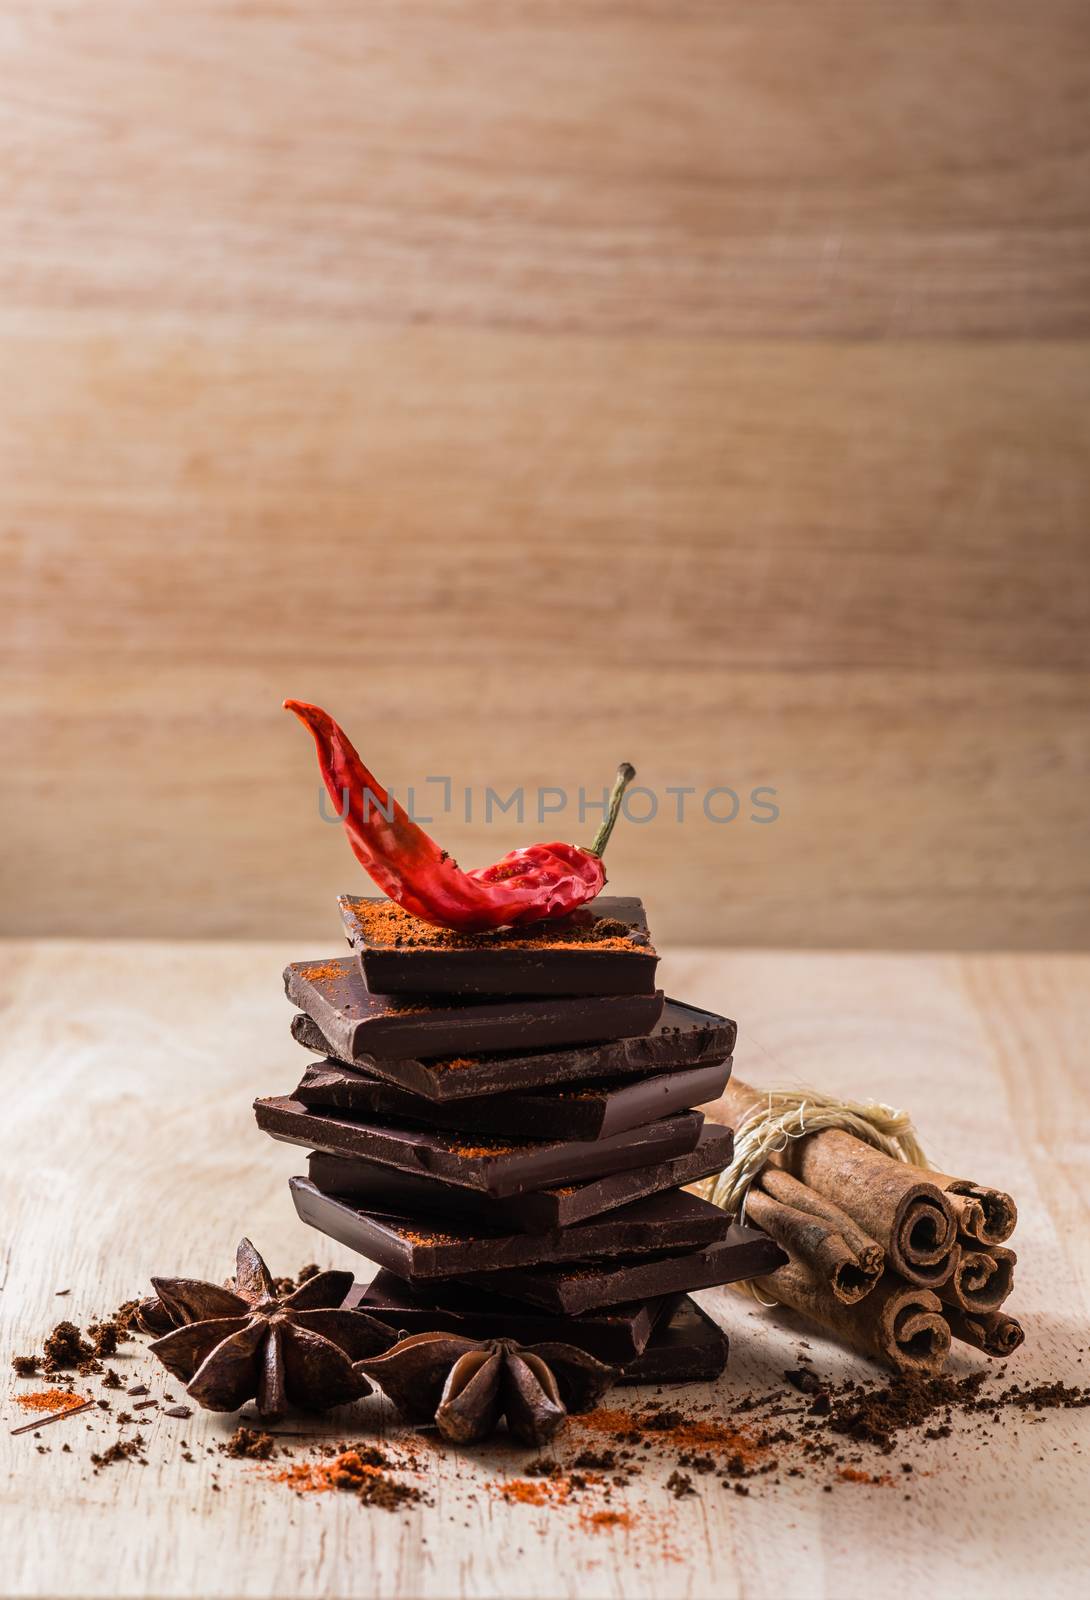 Chocolate and Condiment by Seva_blsv